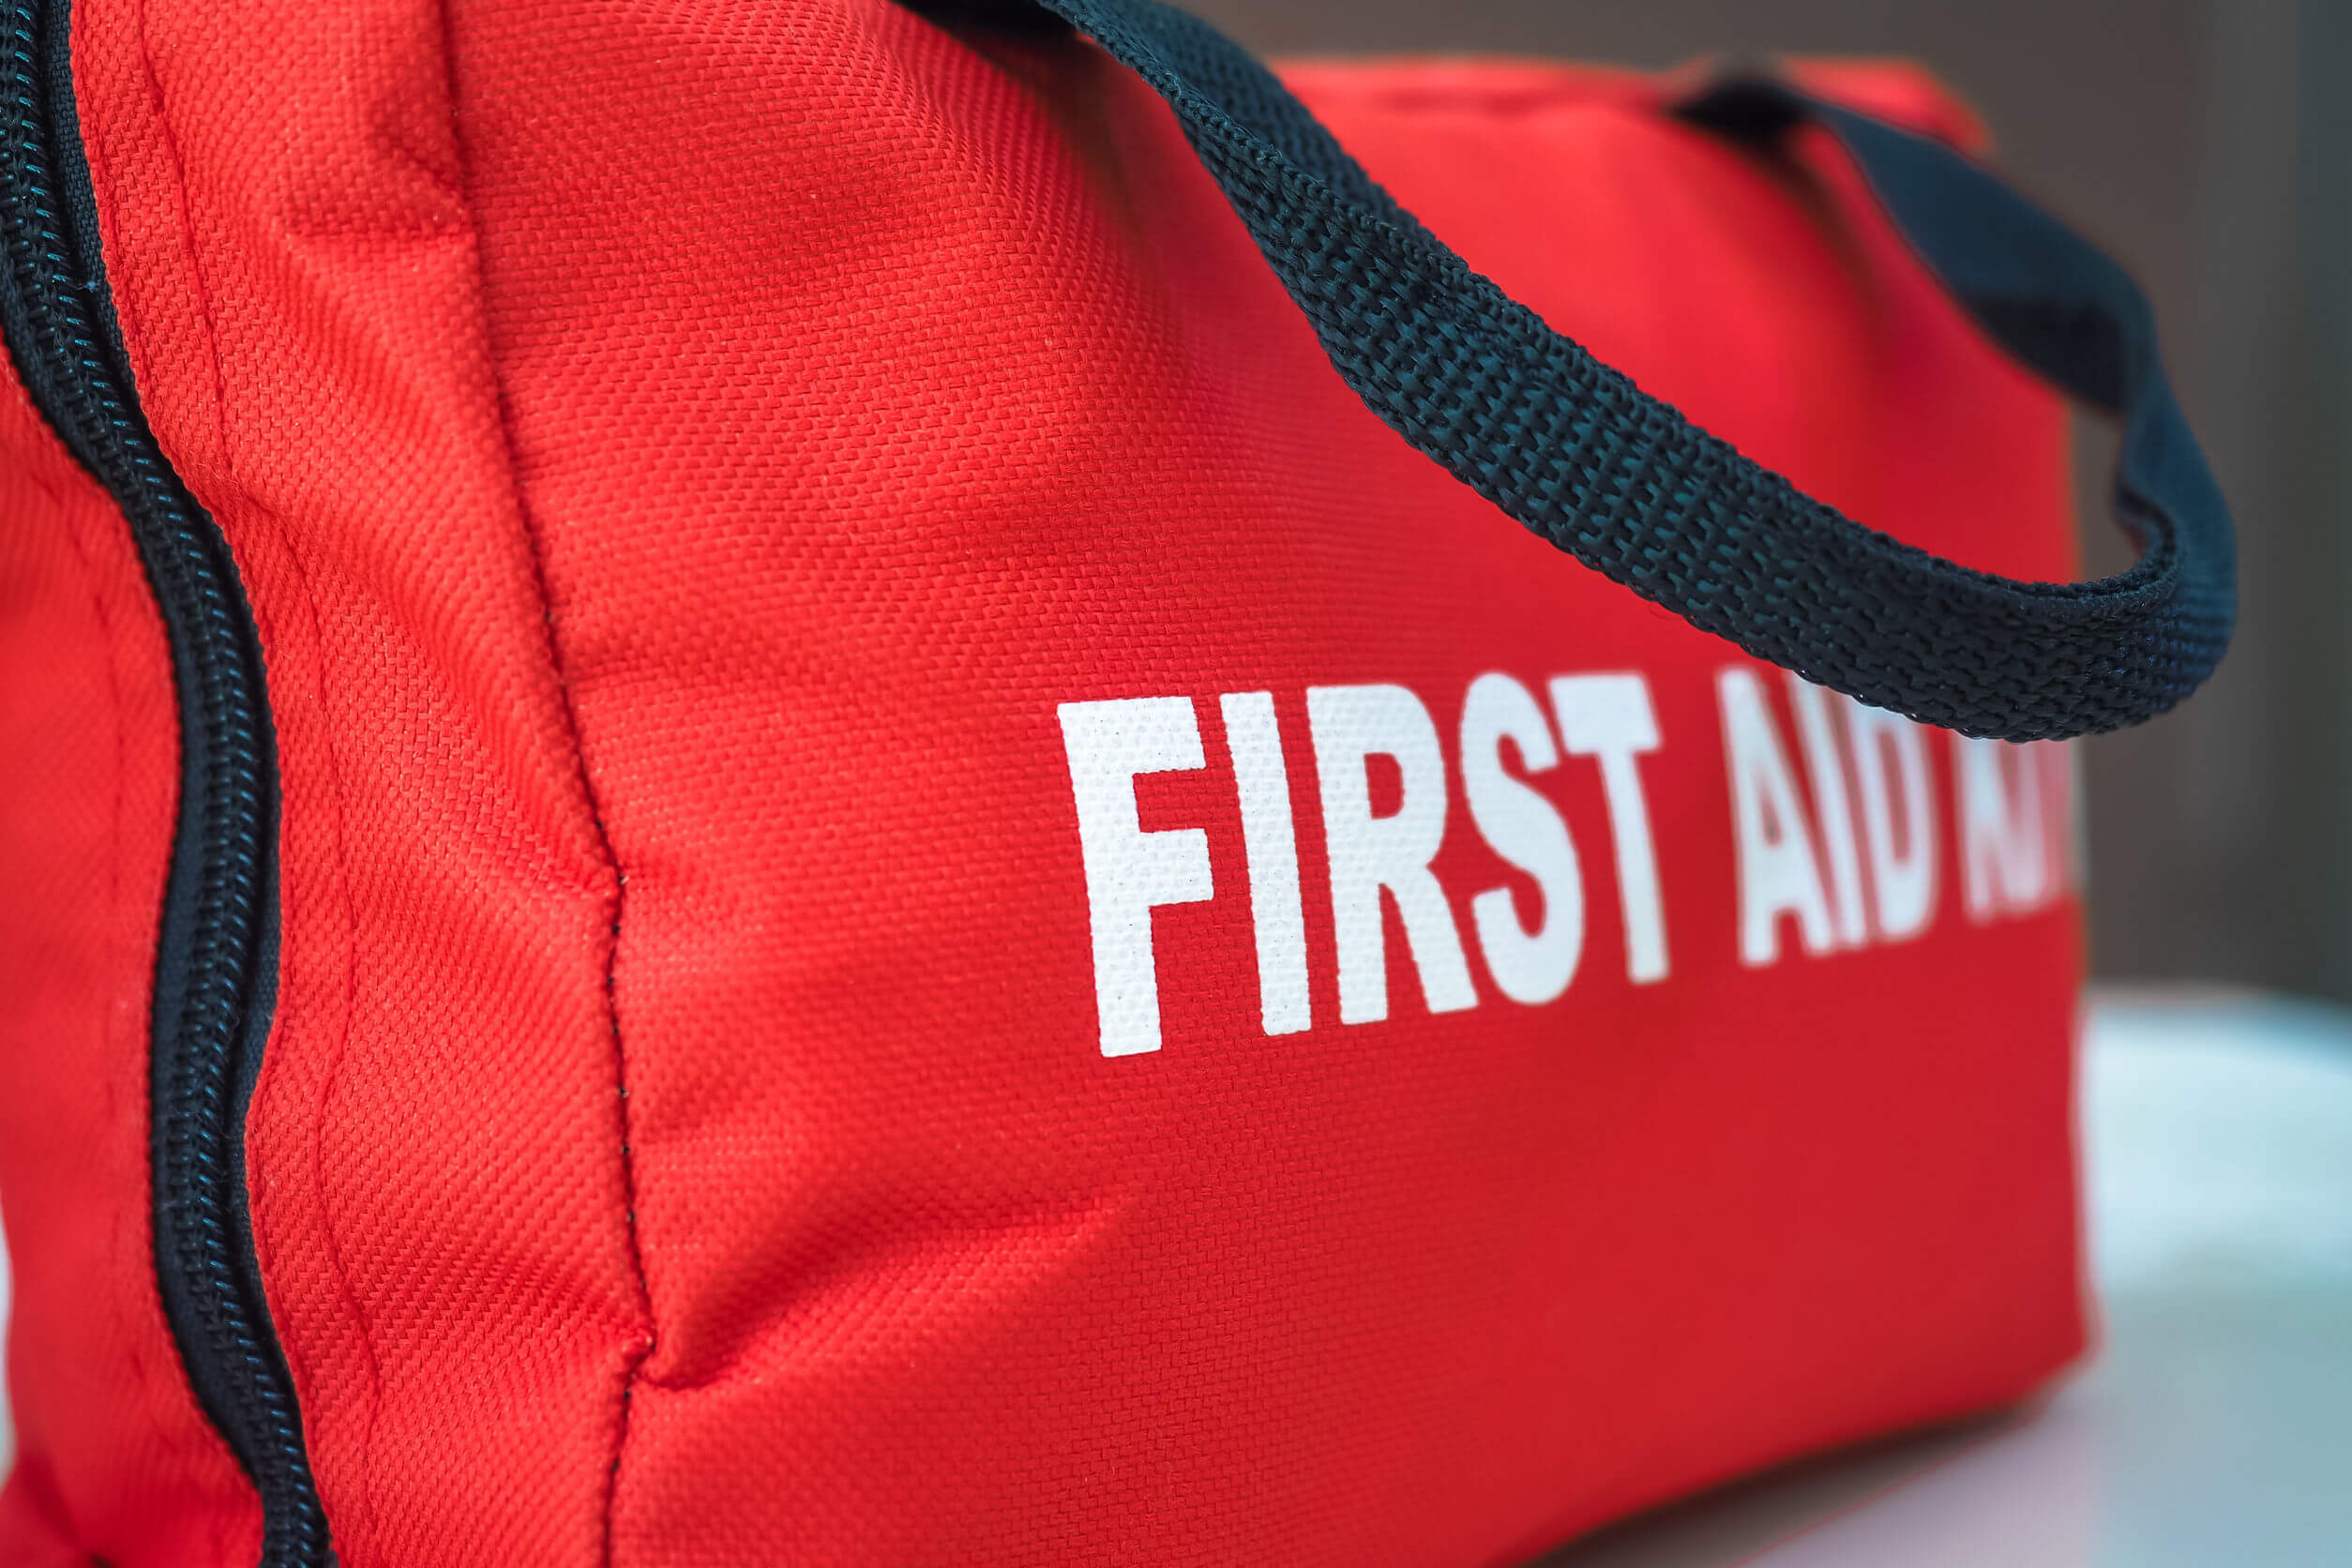 Why is first aid important